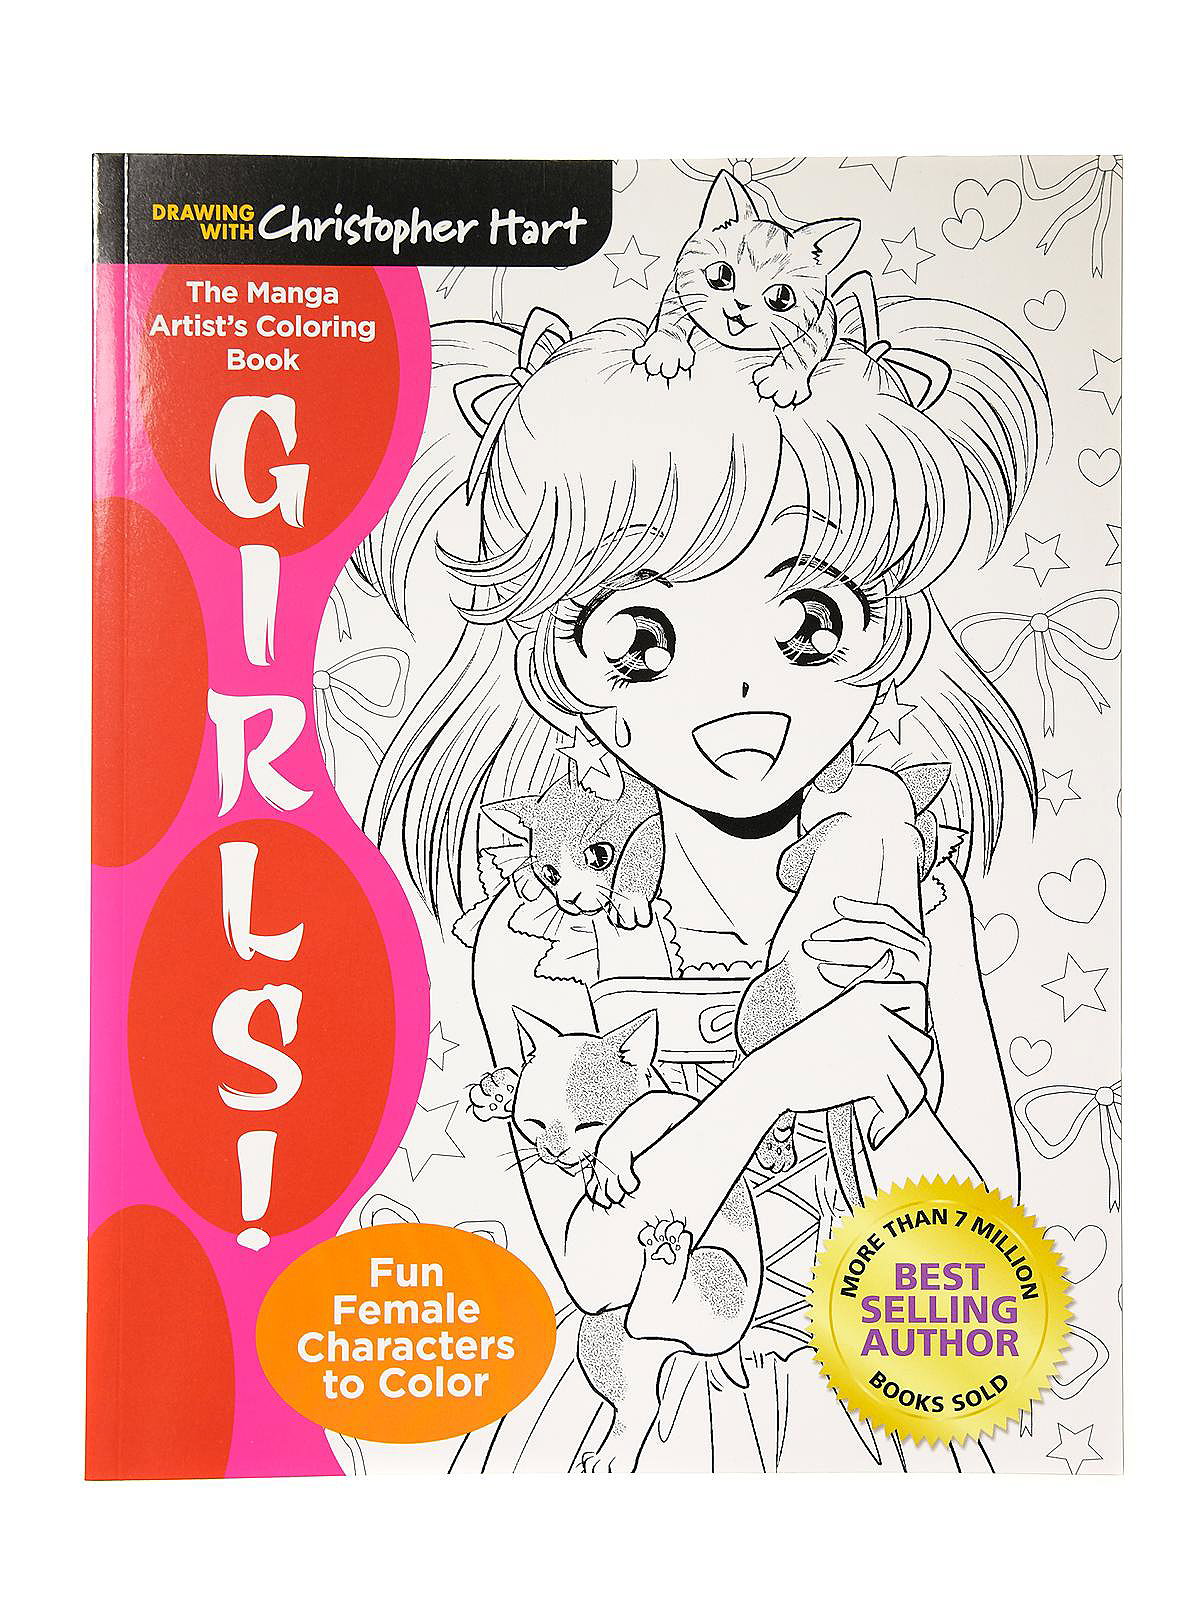 manga coloring pages for kids